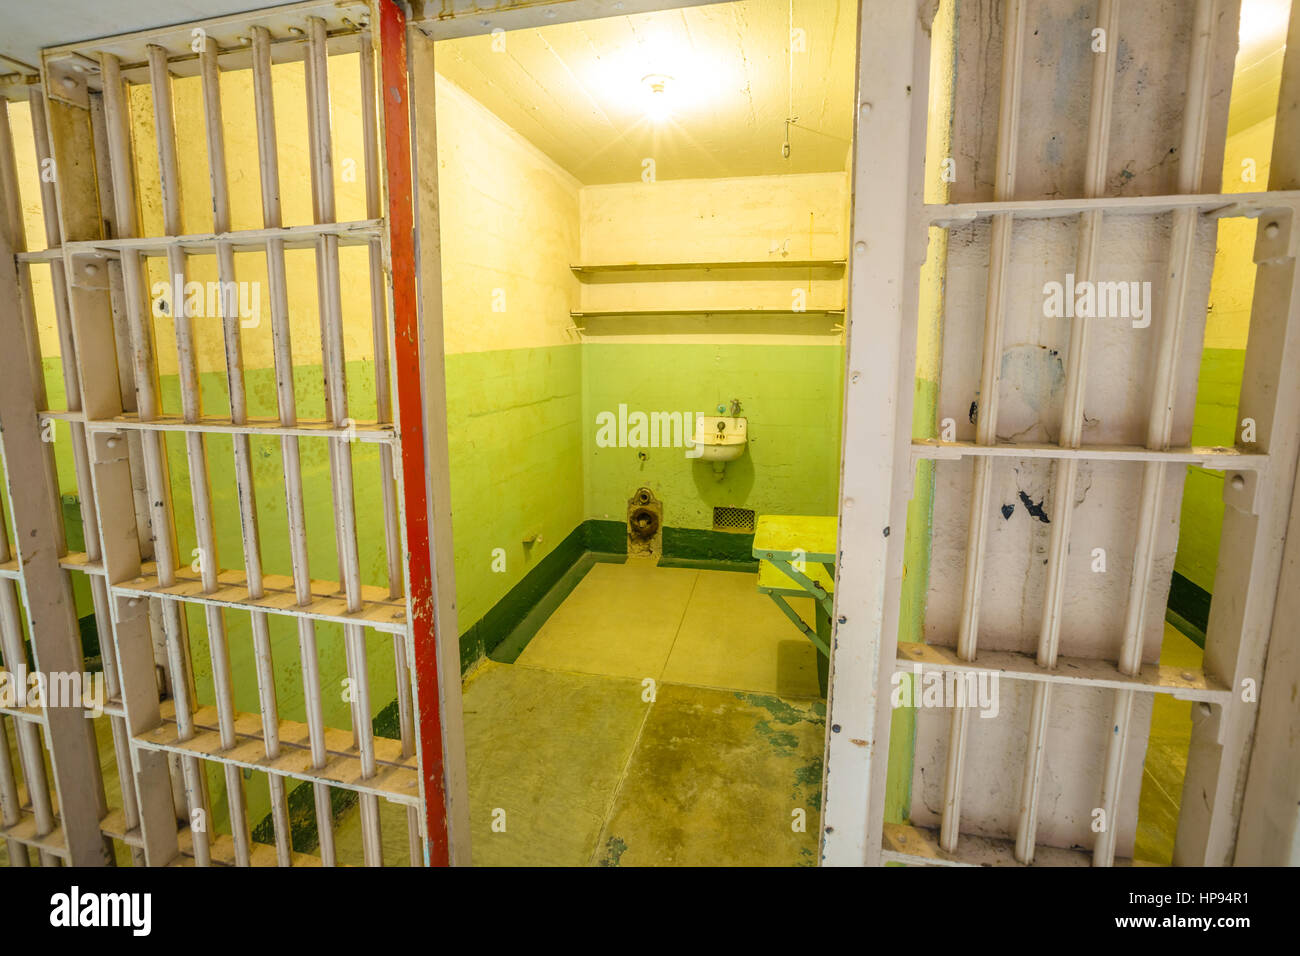 San Francisco, California, United States - August 14, 2016: interior of a single cell of Alcatraz prison. All cells have a private toilet, a sink, one Stock Photo